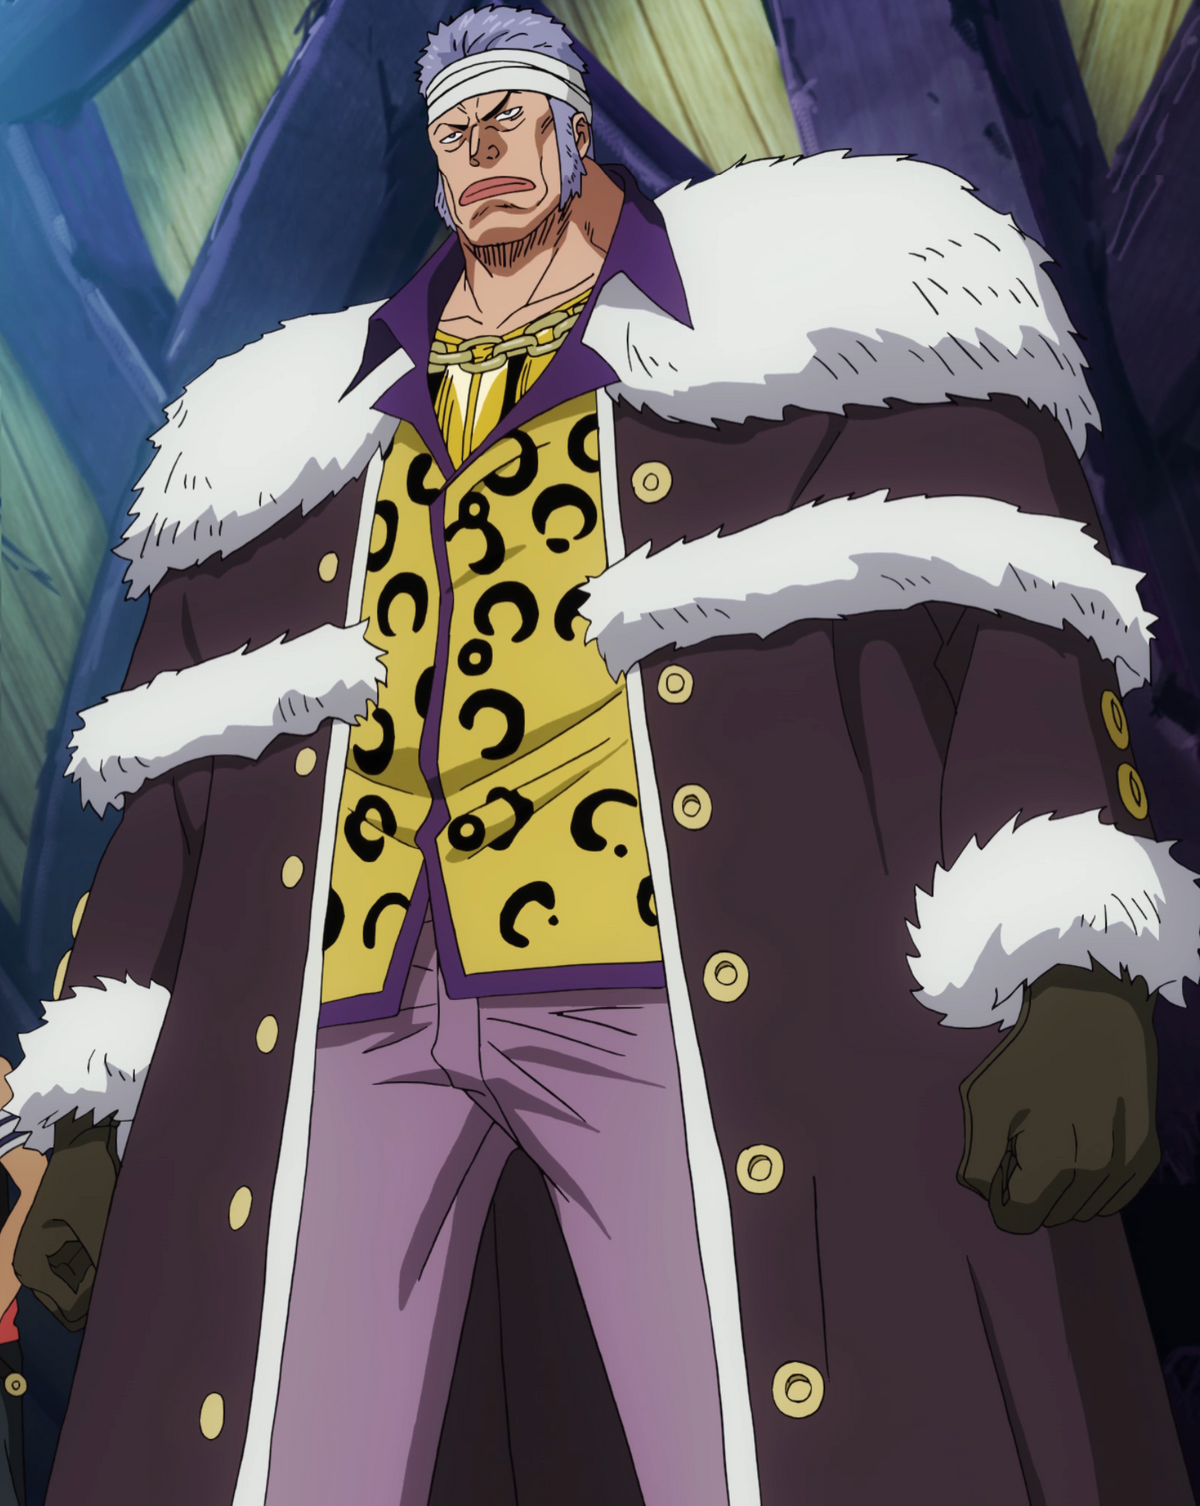 Who was Don Krieg in the One Piece anime & manga? - Quora